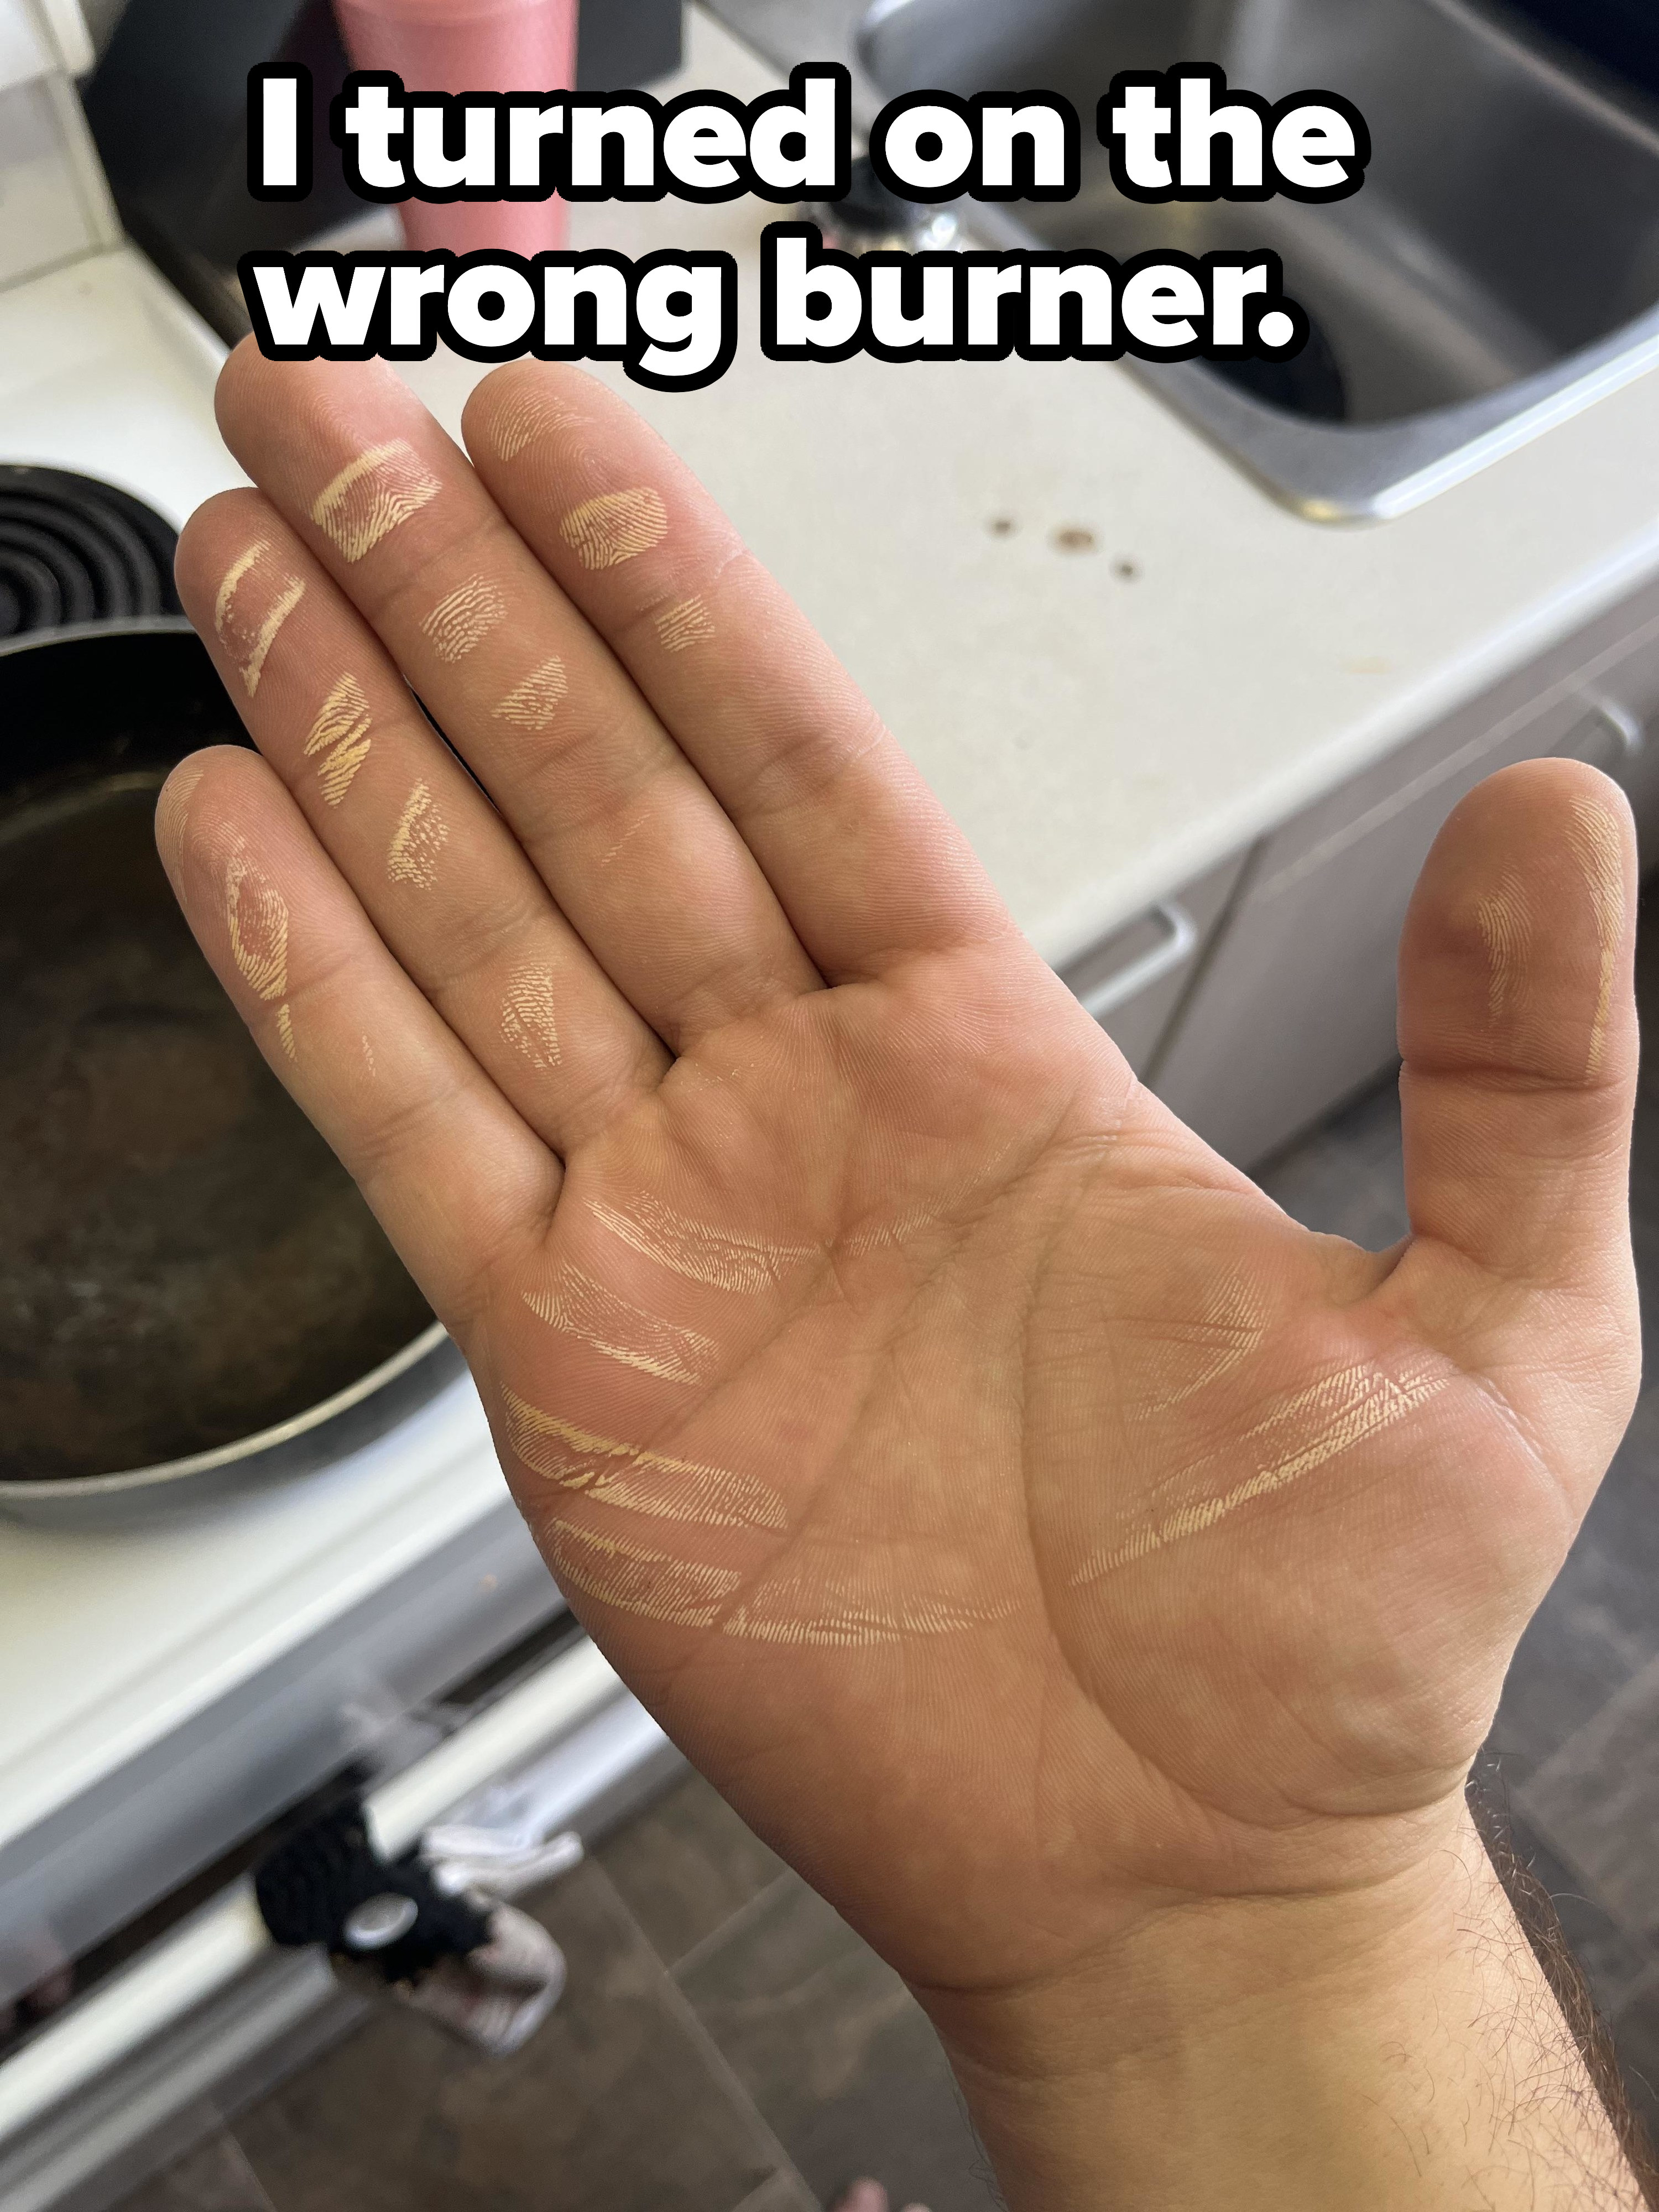 A hand with marks from a stove